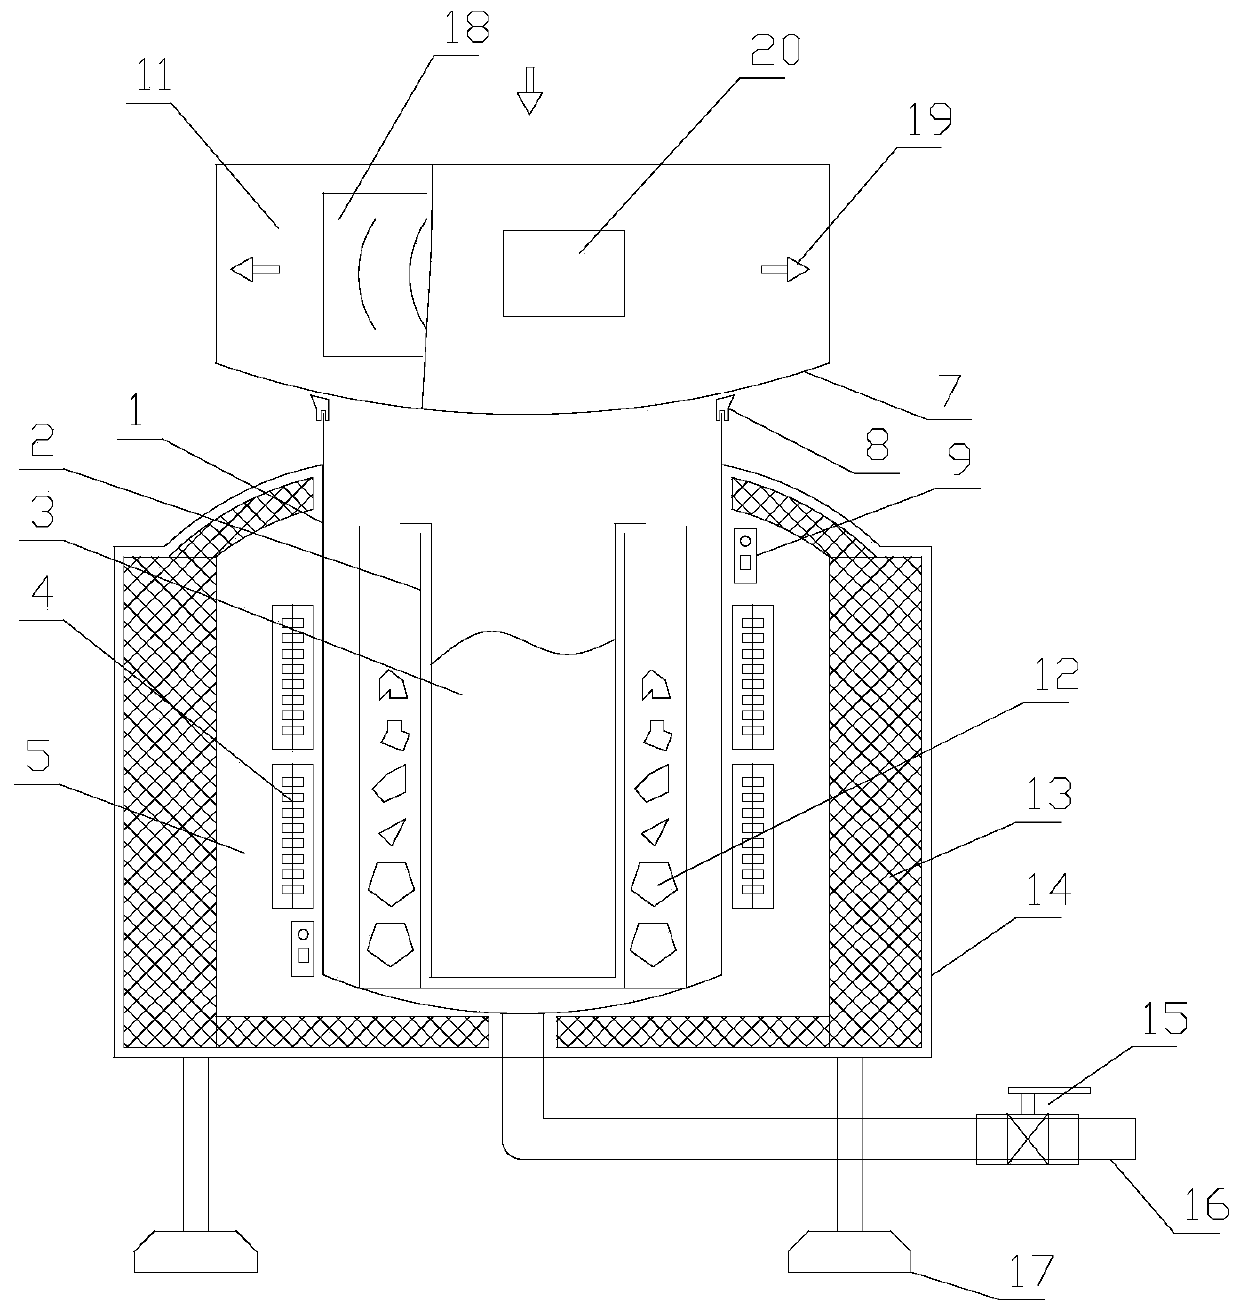 Soft fruit cell sap extraction device and process